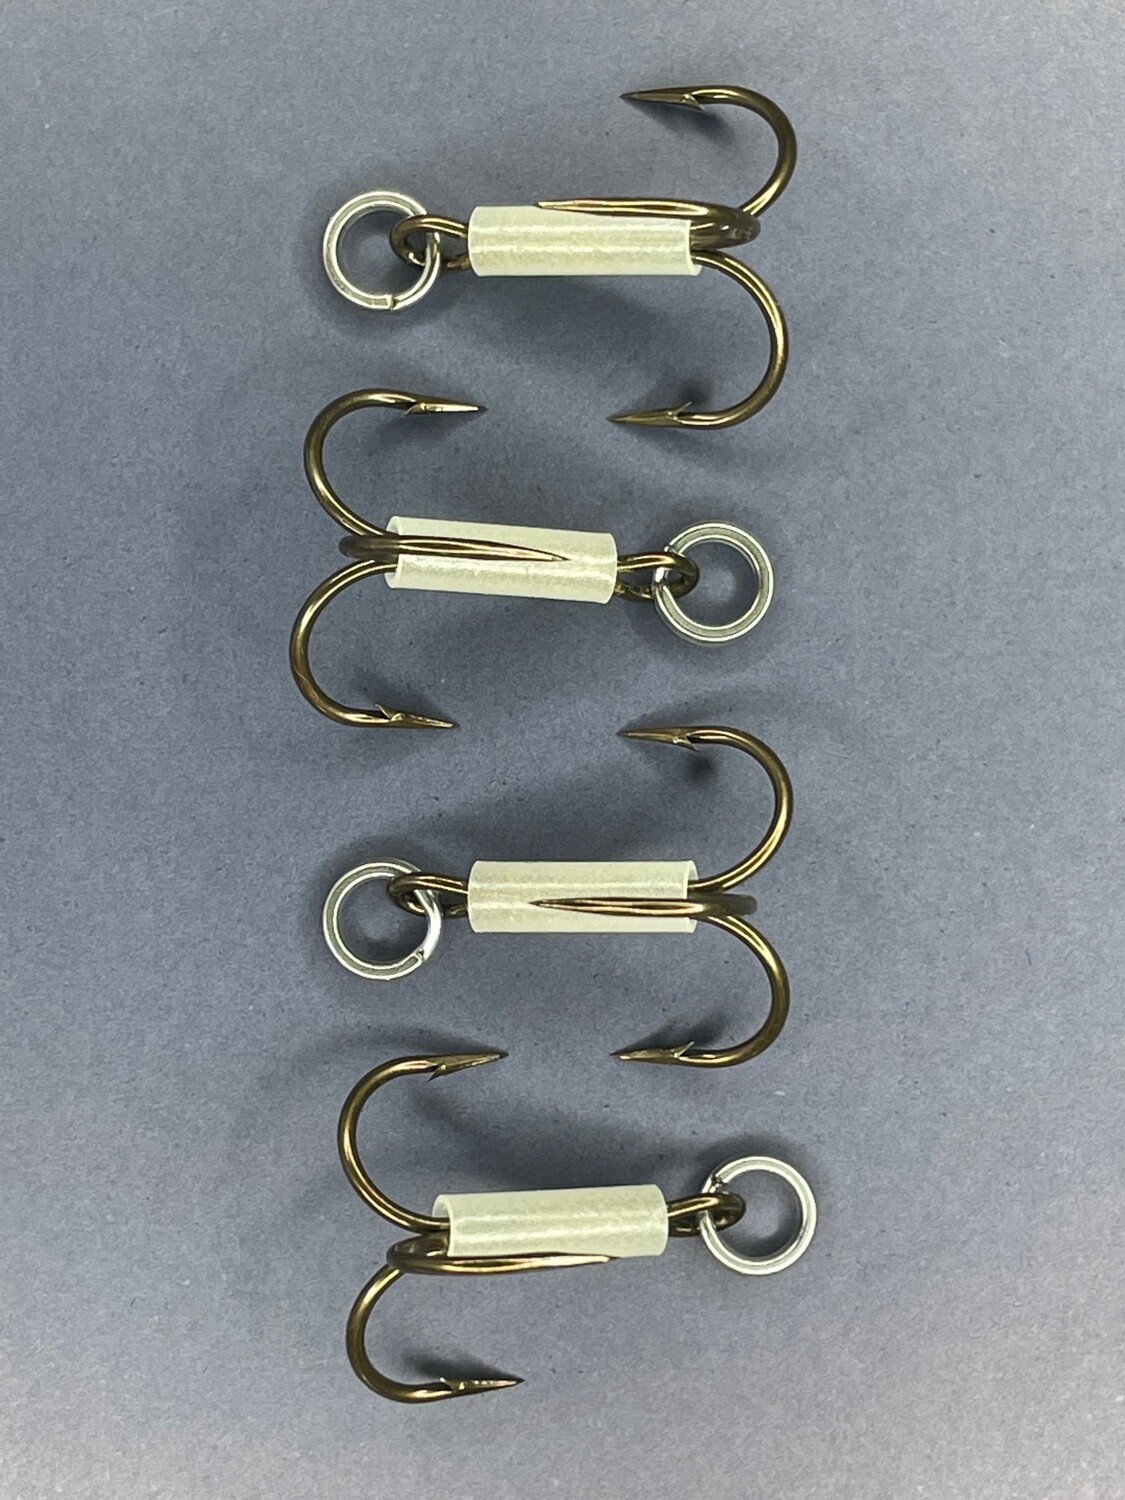 E2.  MAL LURE 4-PACK OF REPLACEMENT TREBLE HOOKS - SIZE #2